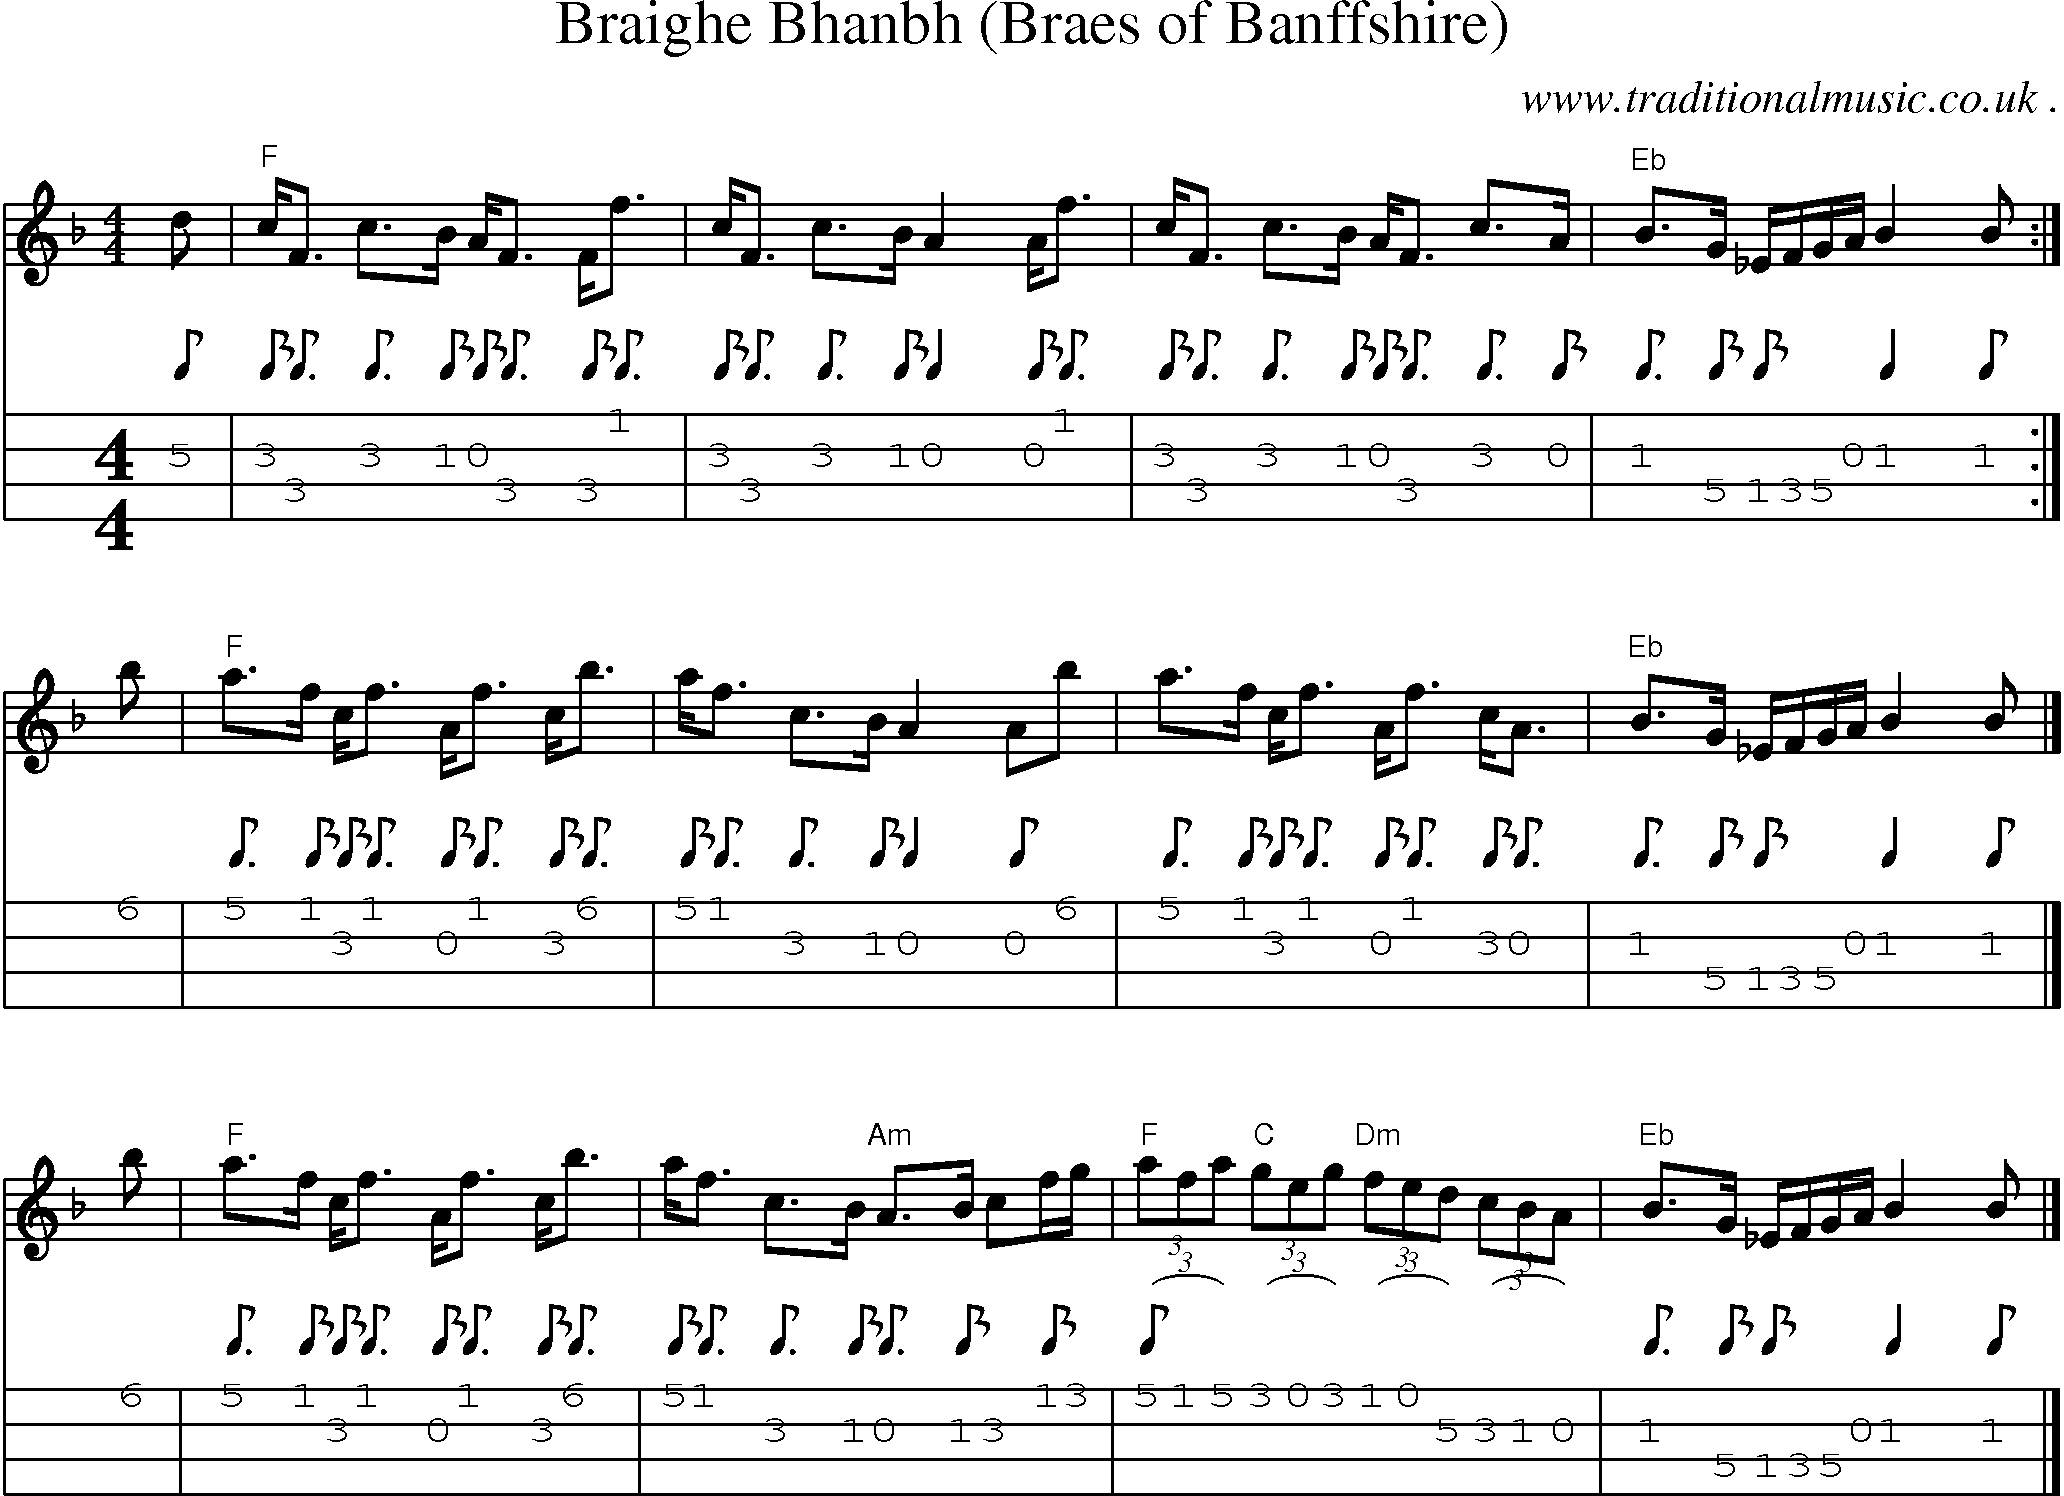 Sheet-music  score, Chords and Mandolin Tabs for Braighe Bhanbh Braes Of Banffshire